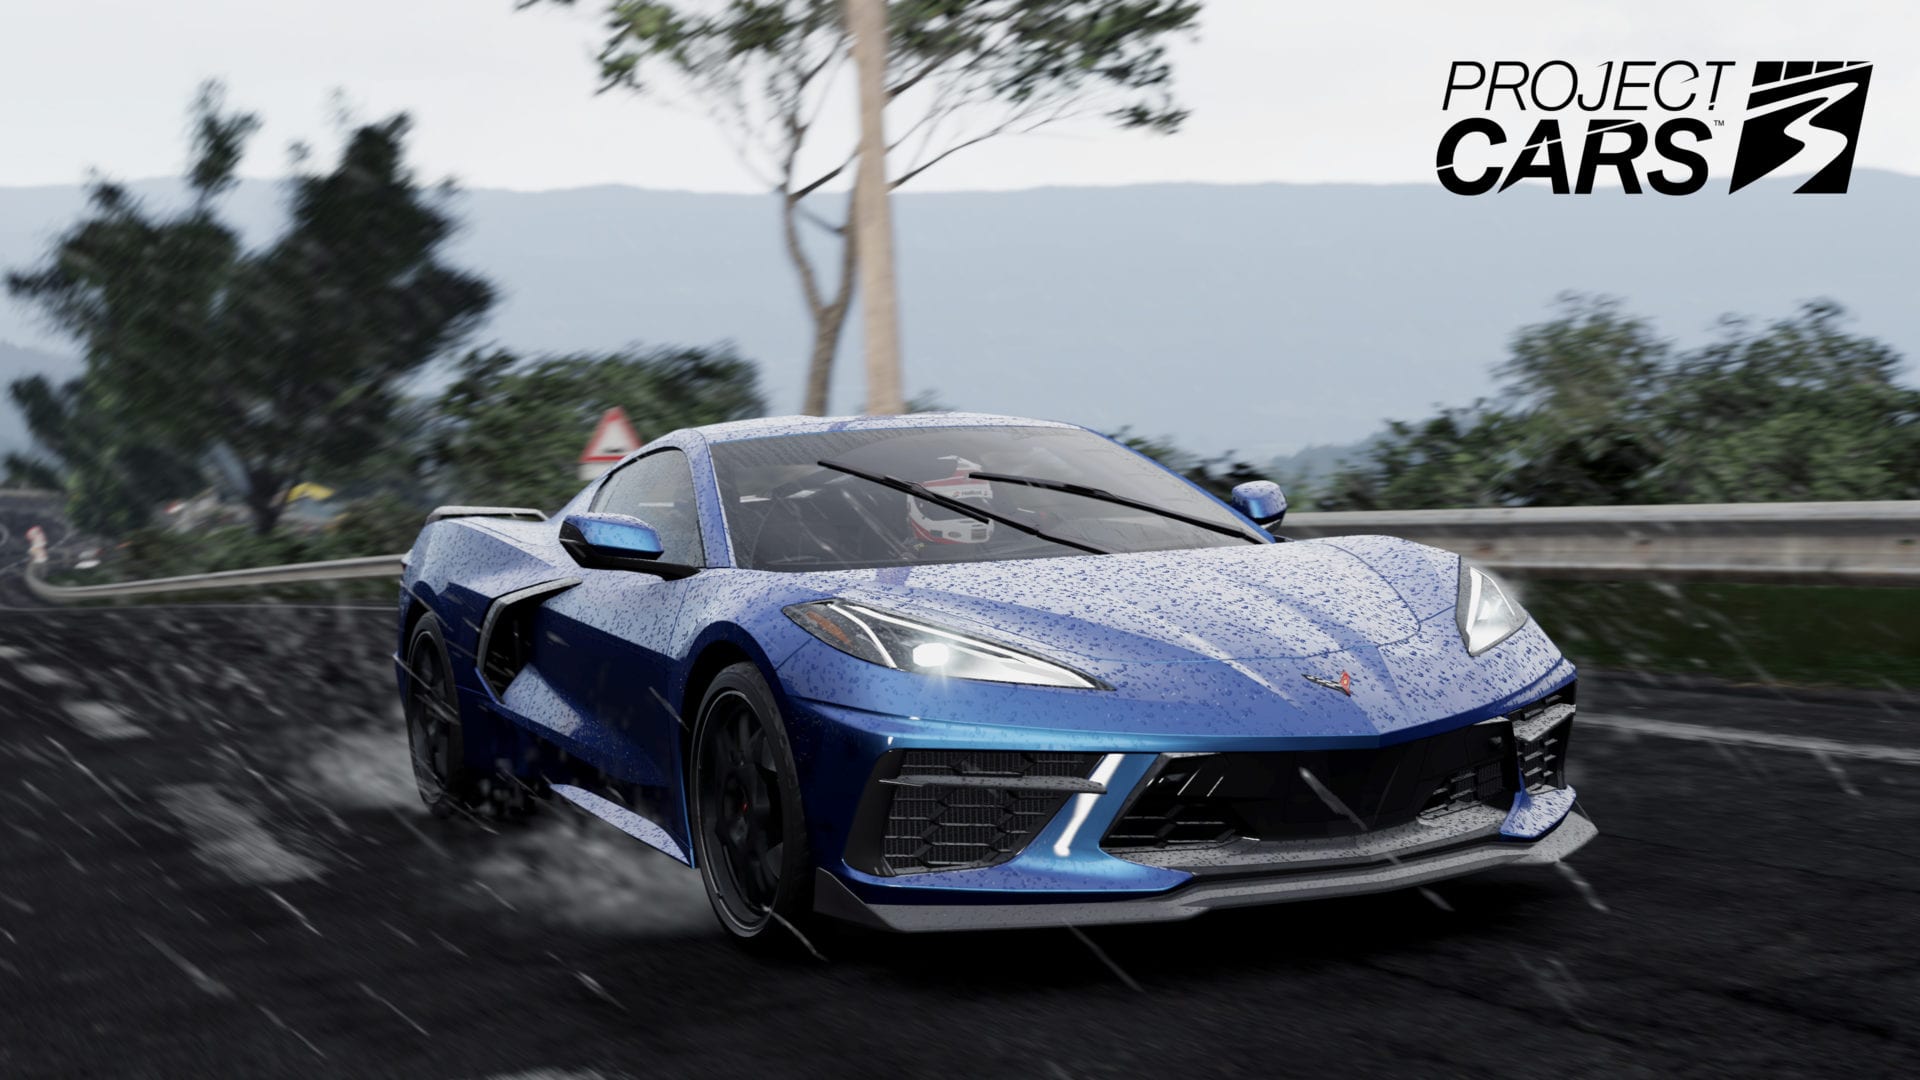 driveclub ps4 2020